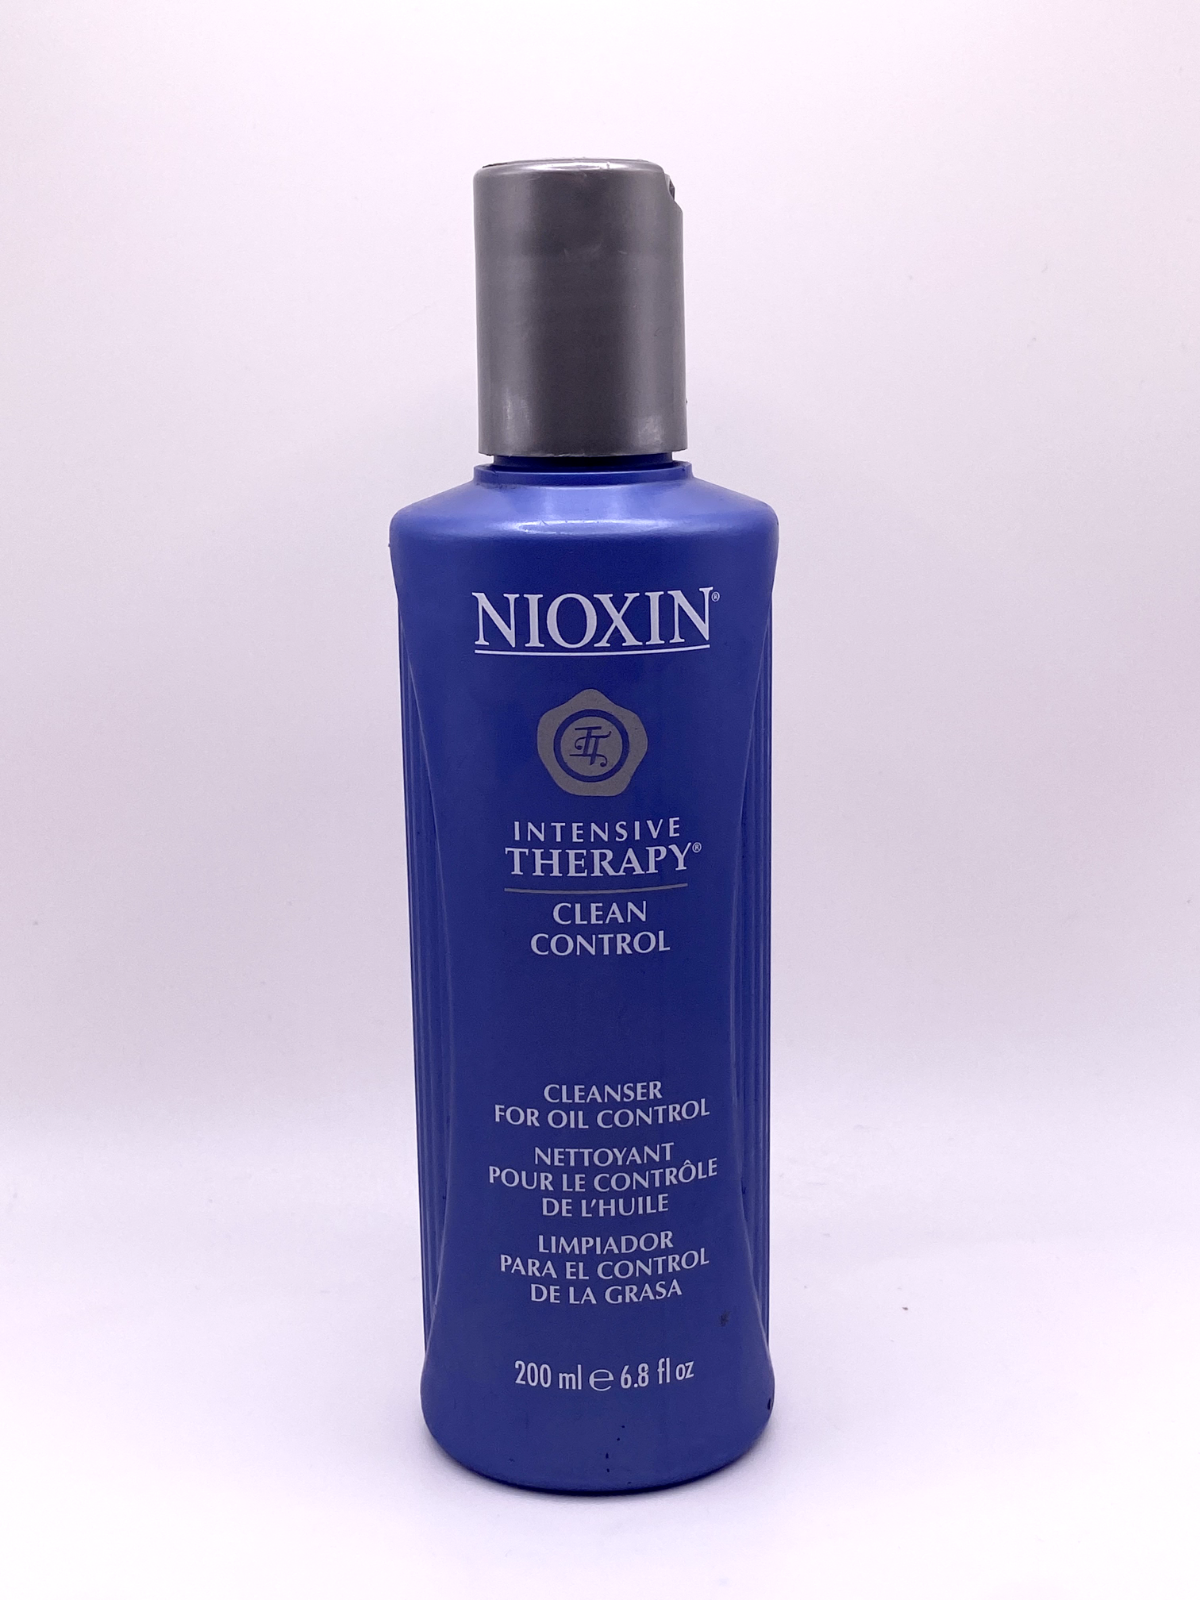 Nioxin Intensive Therapy Clean Control Cleanse Cleanser For Oil Control 6.8 oz - $14.99